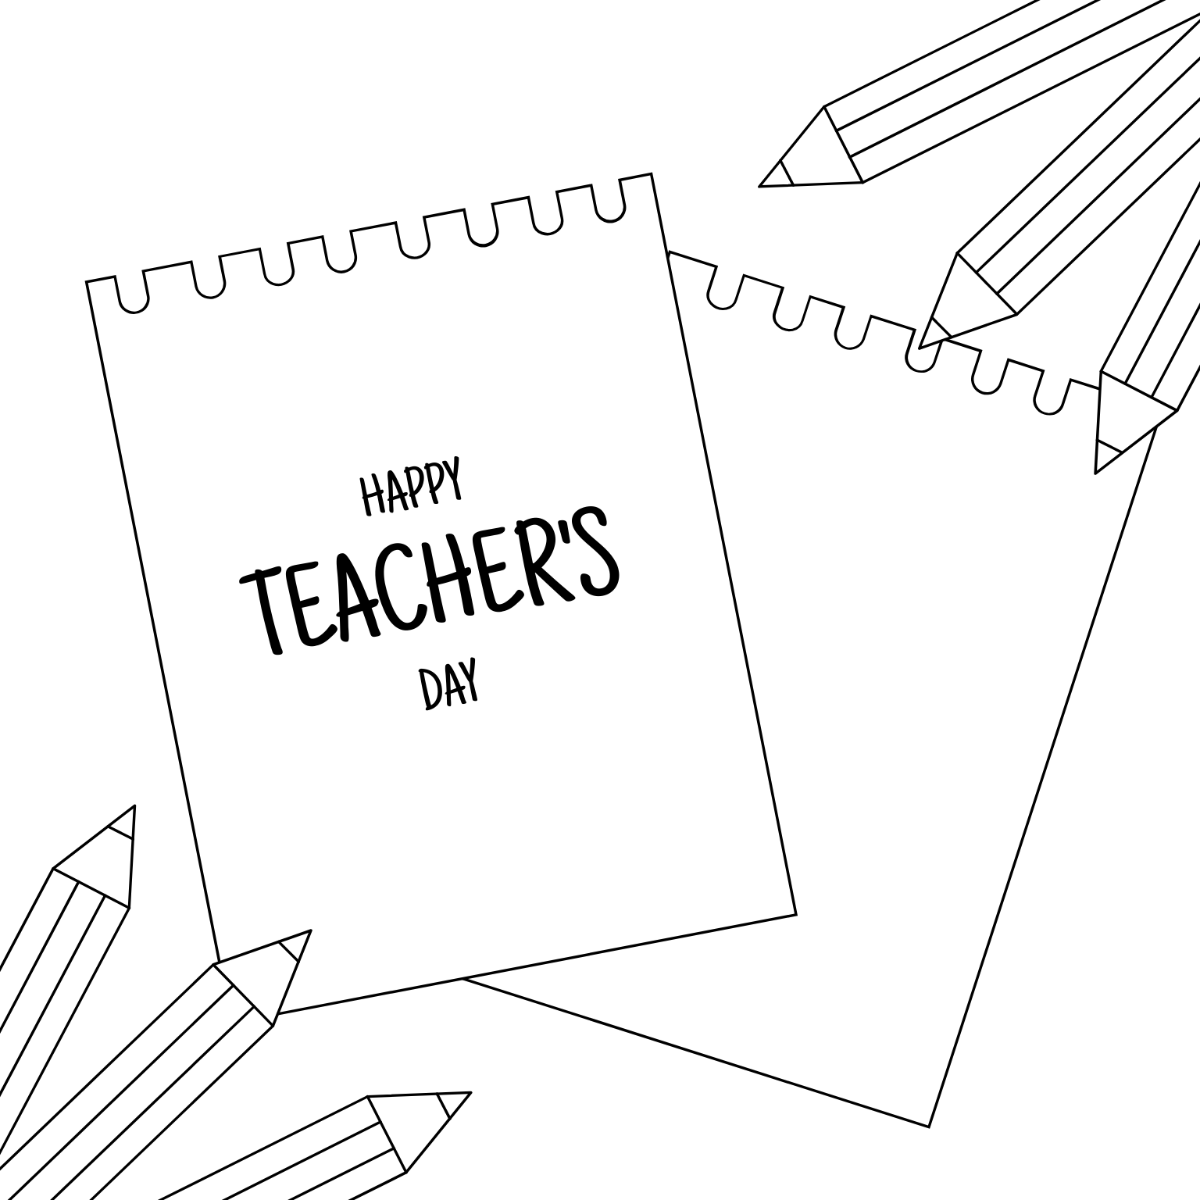 Teachers Day Message Drawing Template